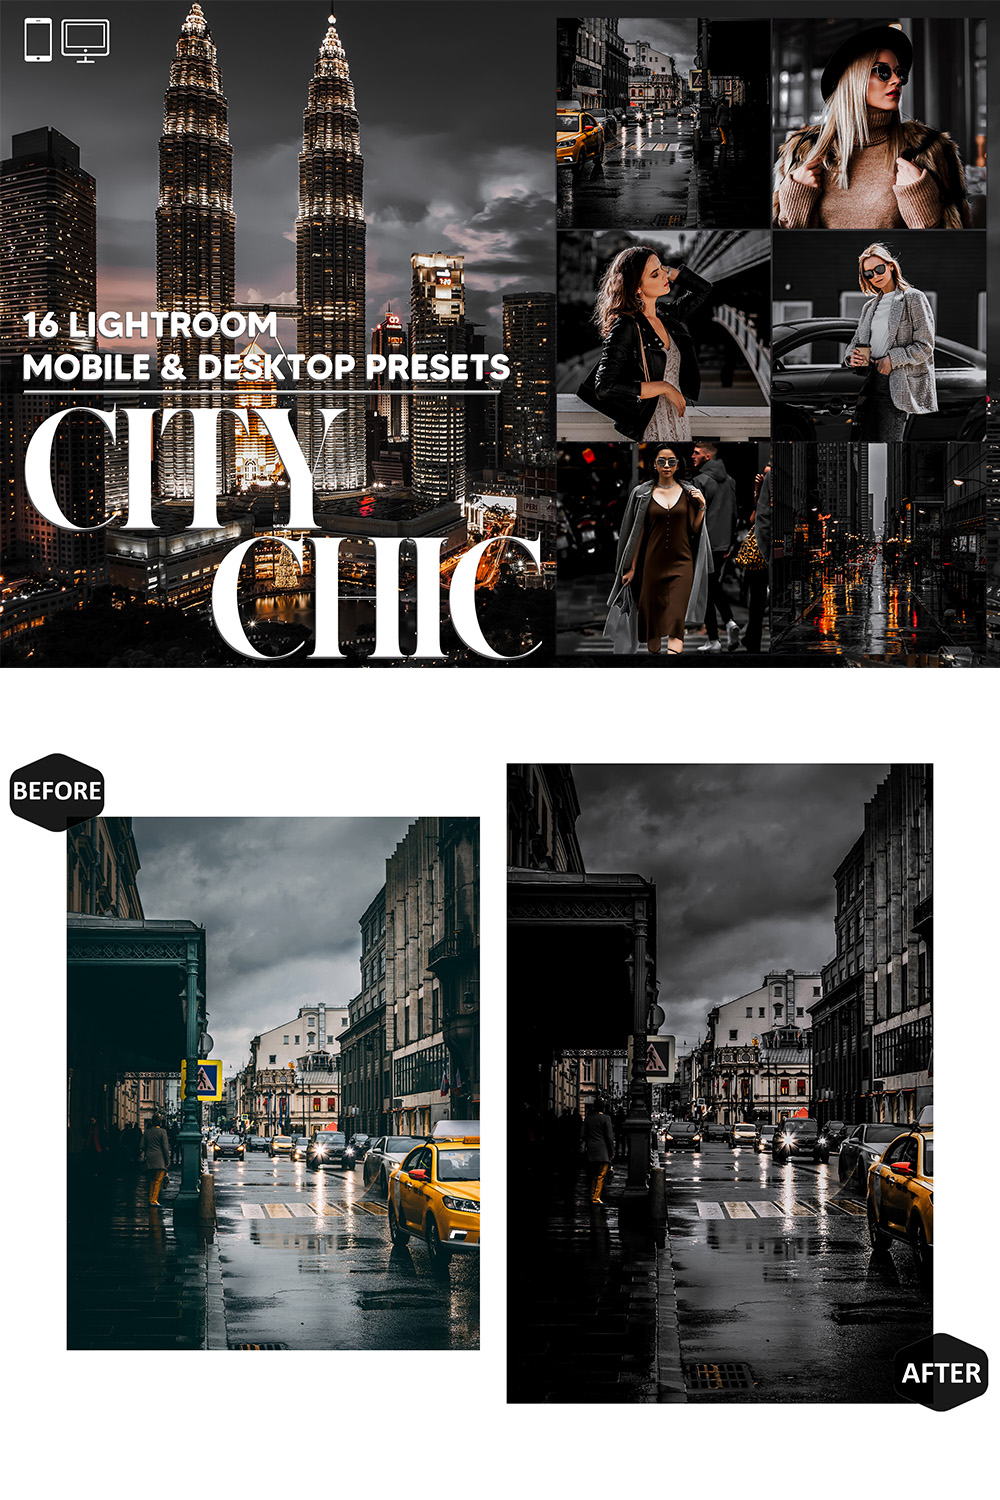 16 City Chic Lightroom Presets, Moody Urban Mobile Preset, Town Desktop LR Filter, DNG Instagram And Blogger Theme For Portrait, Lifestyle pinterest preview image.